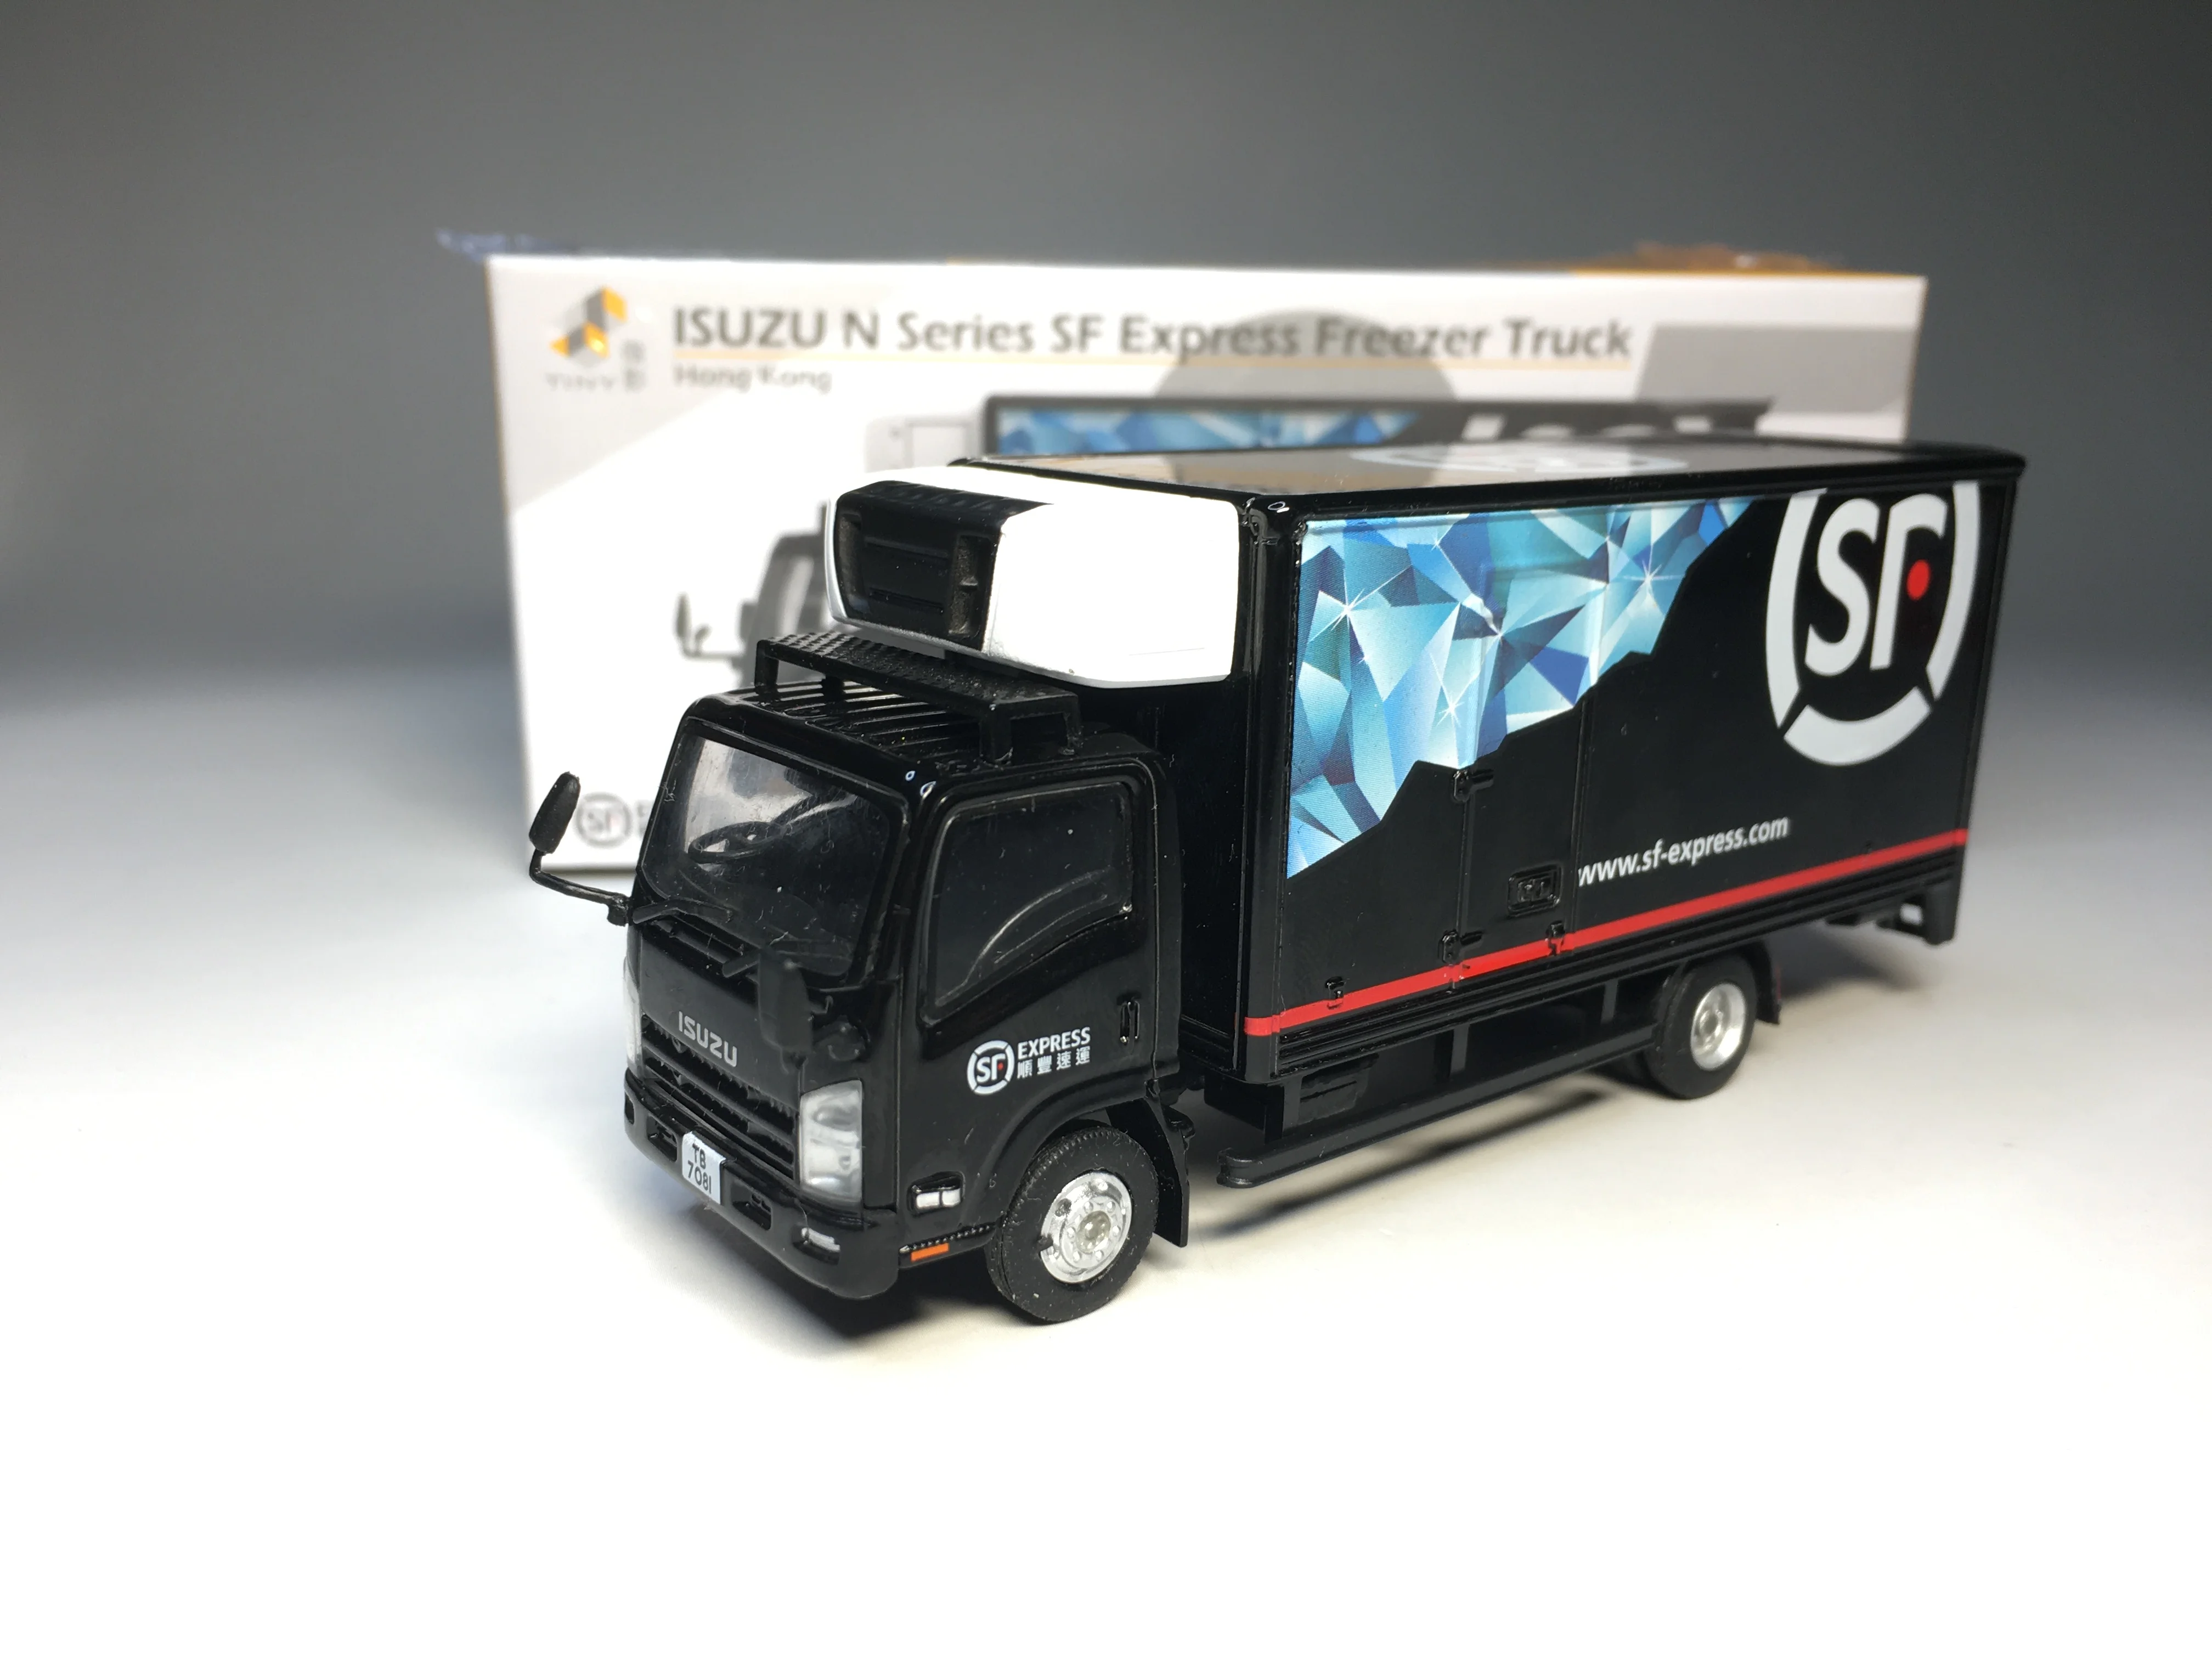 

Tiny 1/76 Isuzu N Series SF Express Freezer Truck Die Cast Model Car Collection Limited